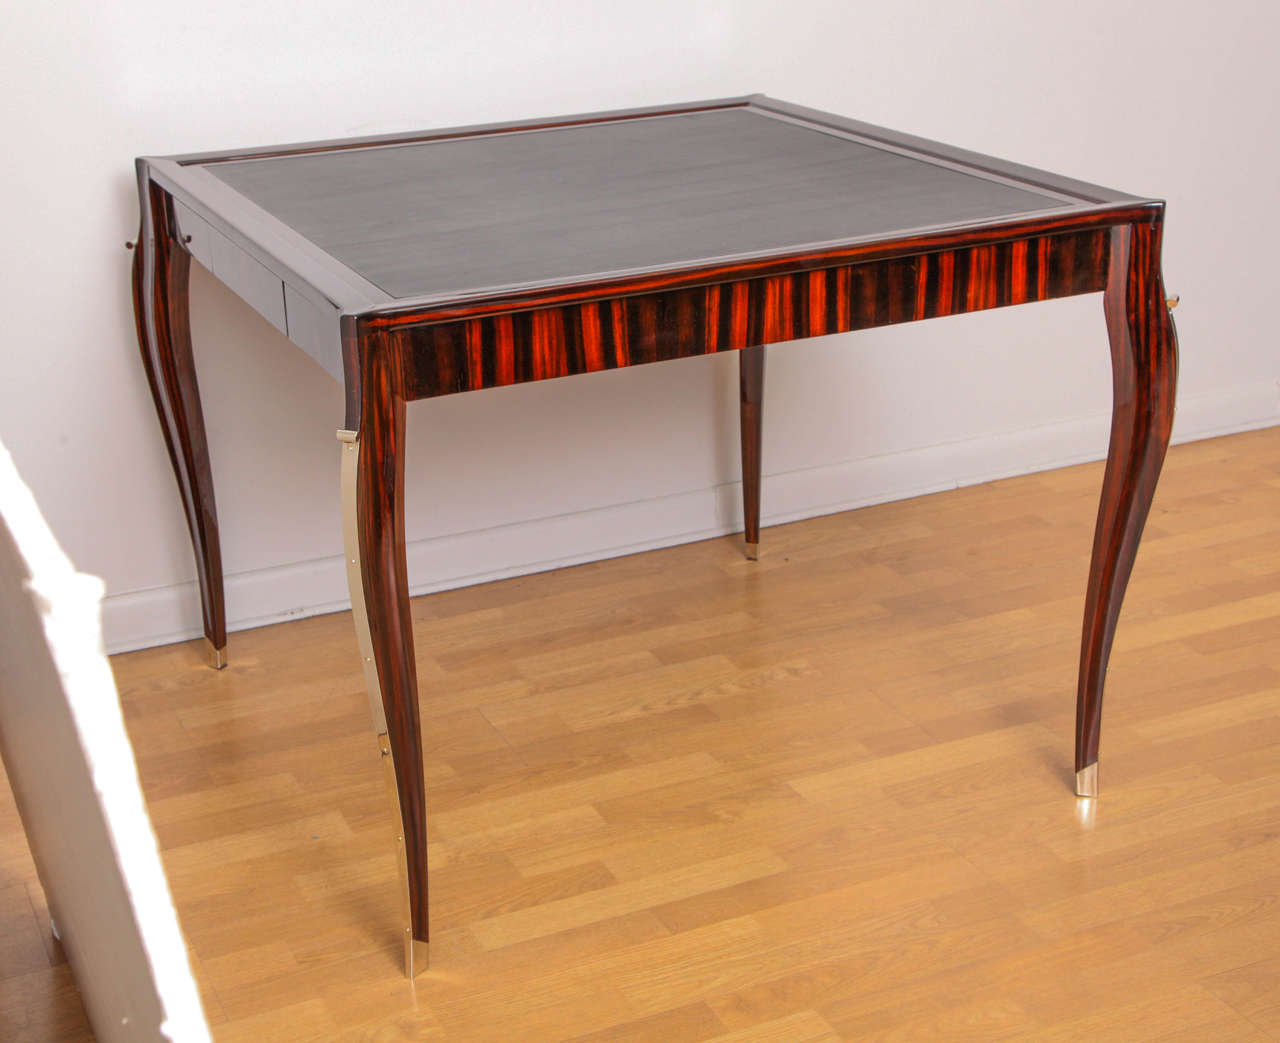 An Art Deco card table with black leather top, macassar ebony and nickel details.